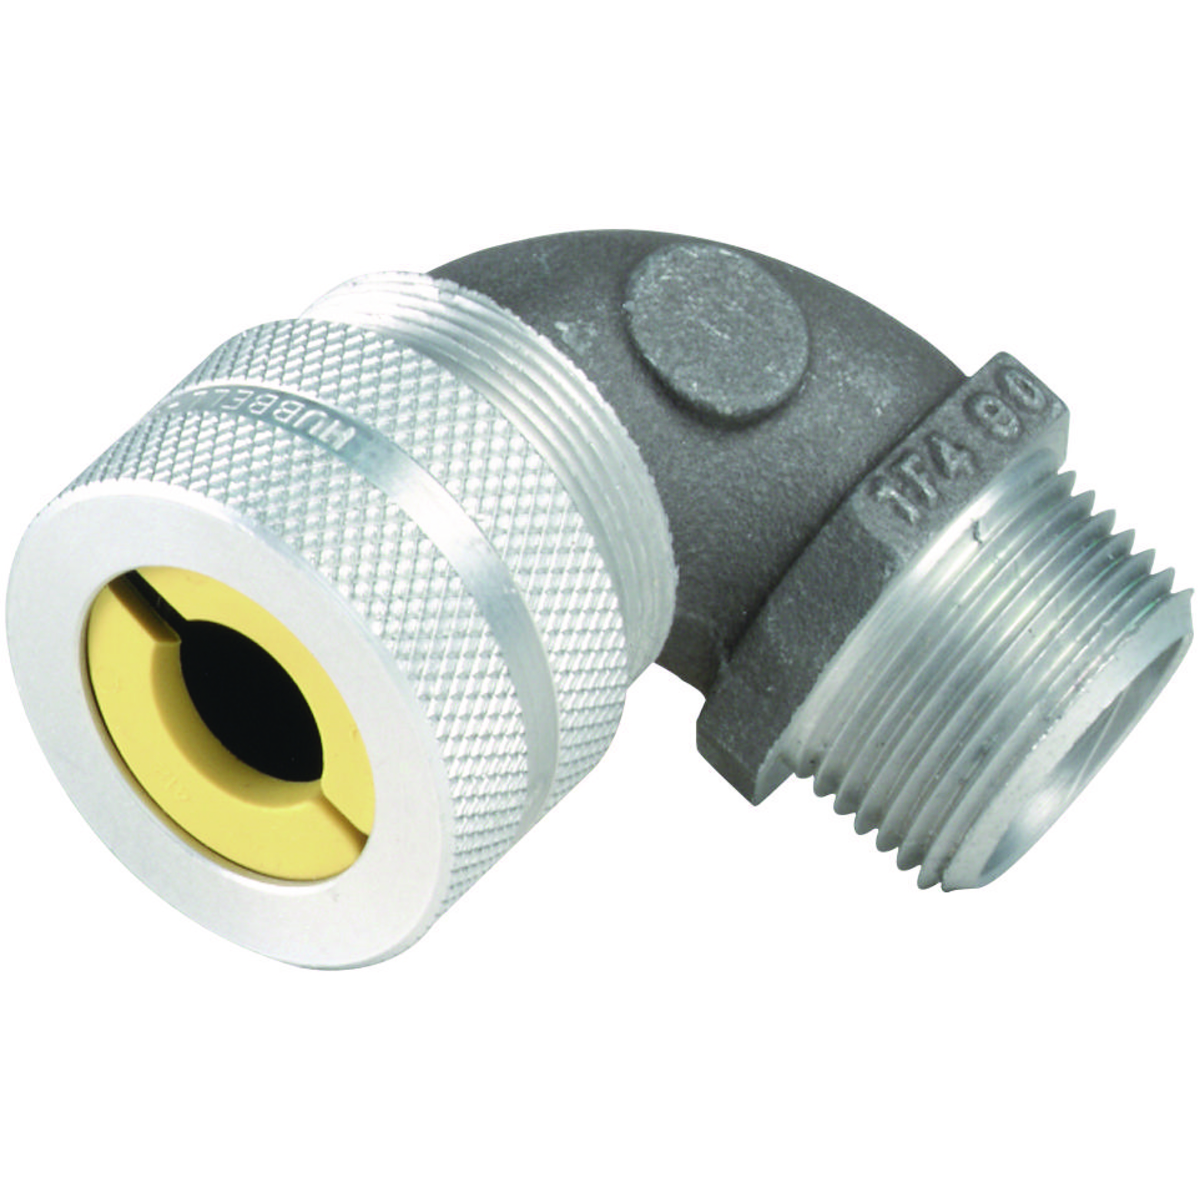 Z SERIES - ALUMINUM INCREASED SAFETY 90-DEGREE CORD CONNECTOR - PURPLECORD RANGE 0.750 TO 0.875 - HUB SIZE 1 INCH NPT